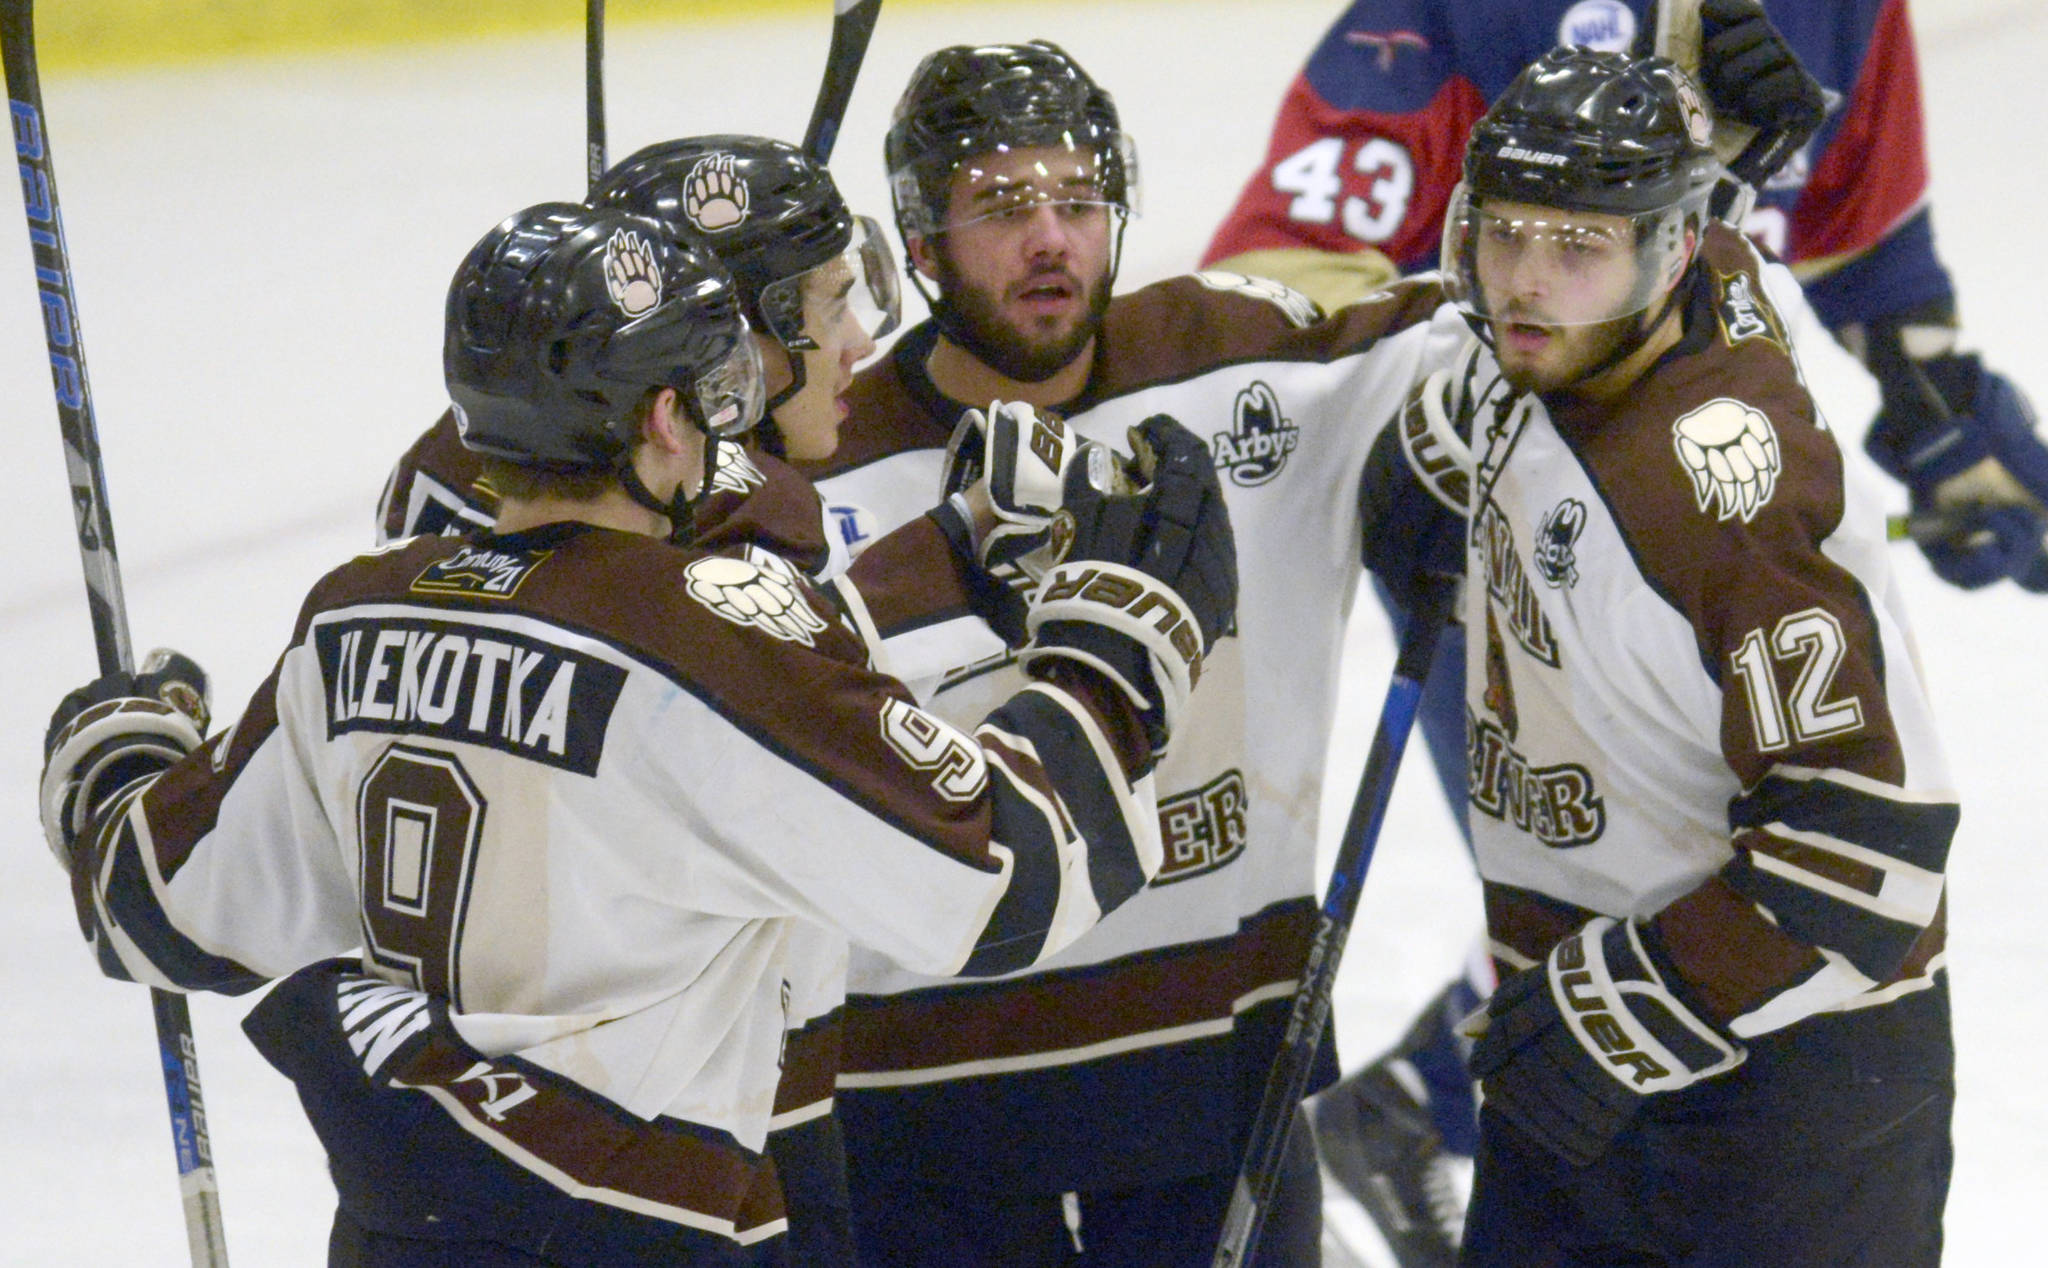 Trey LaBarge (far right) celebrates his first-period goal against the Topeka (Kansas) Pilots with teammates Friday, Feb. 1, 2019, at the Soldotna Regional Sports Complex. (Photo by Jeff Helminiak/Peninsula Clarion)